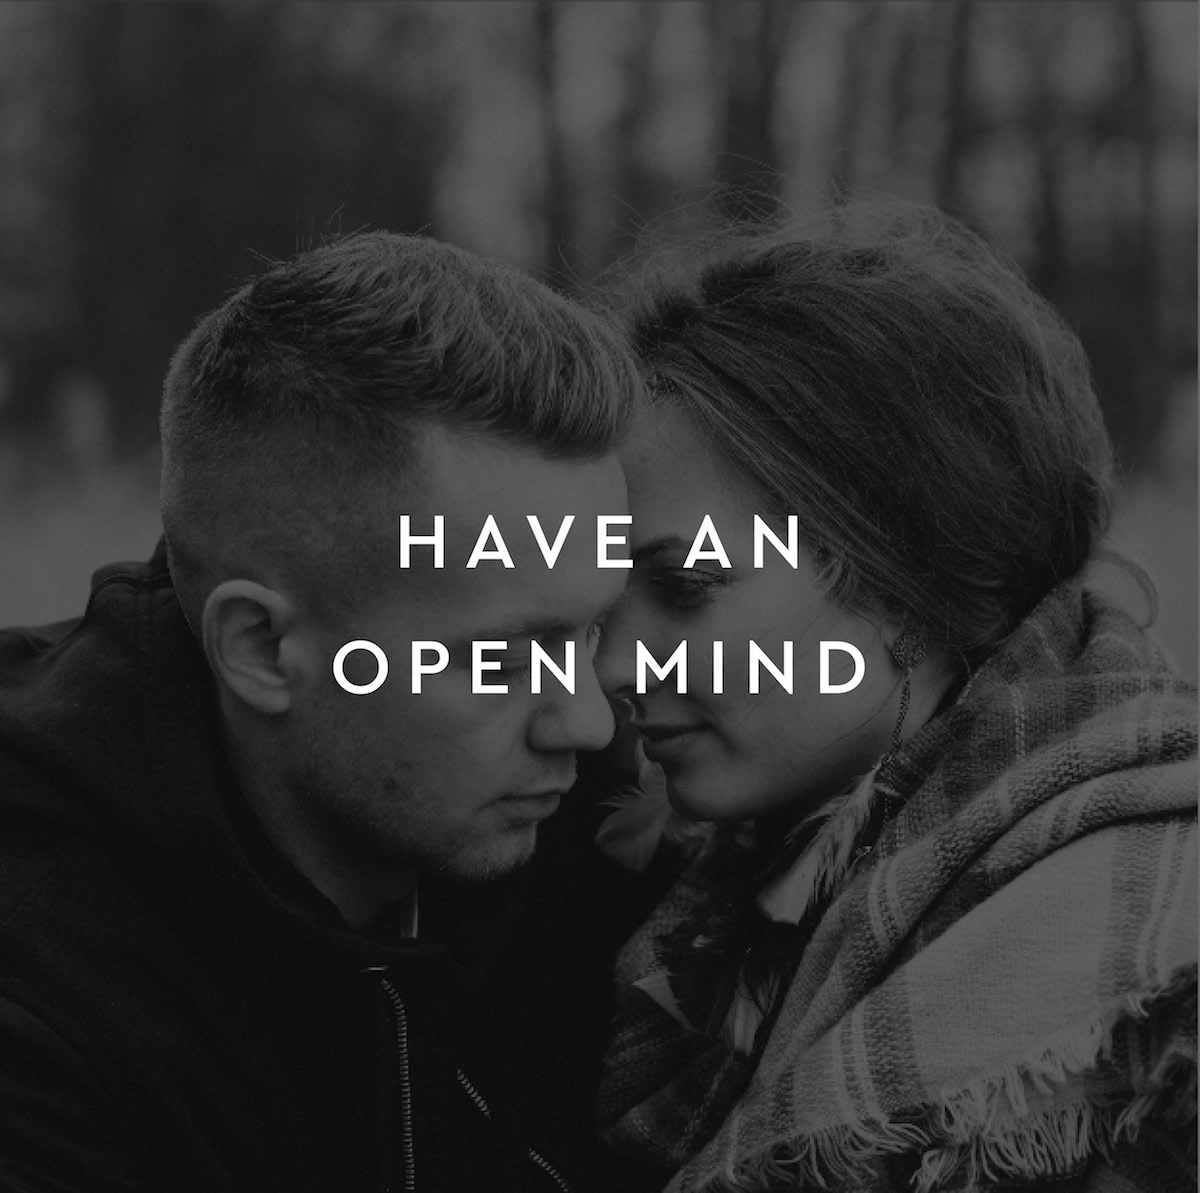 Have an open mind